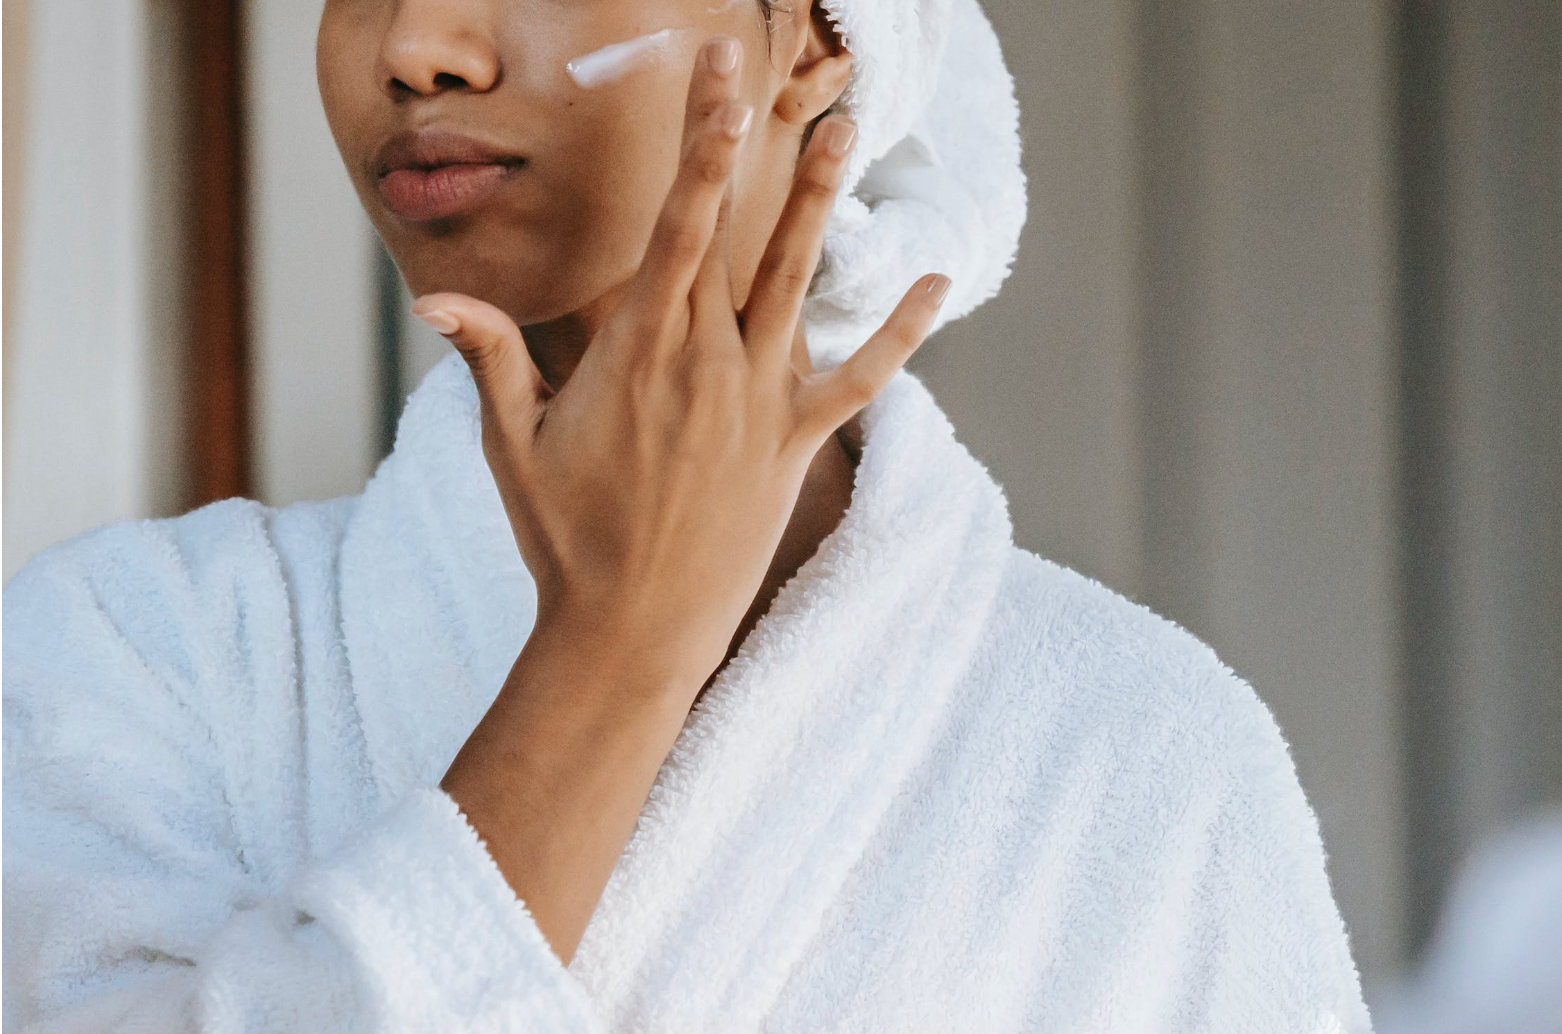 Can Your Moisturizer Cause Acne? Pore-Clogging Ingredients to Avoid